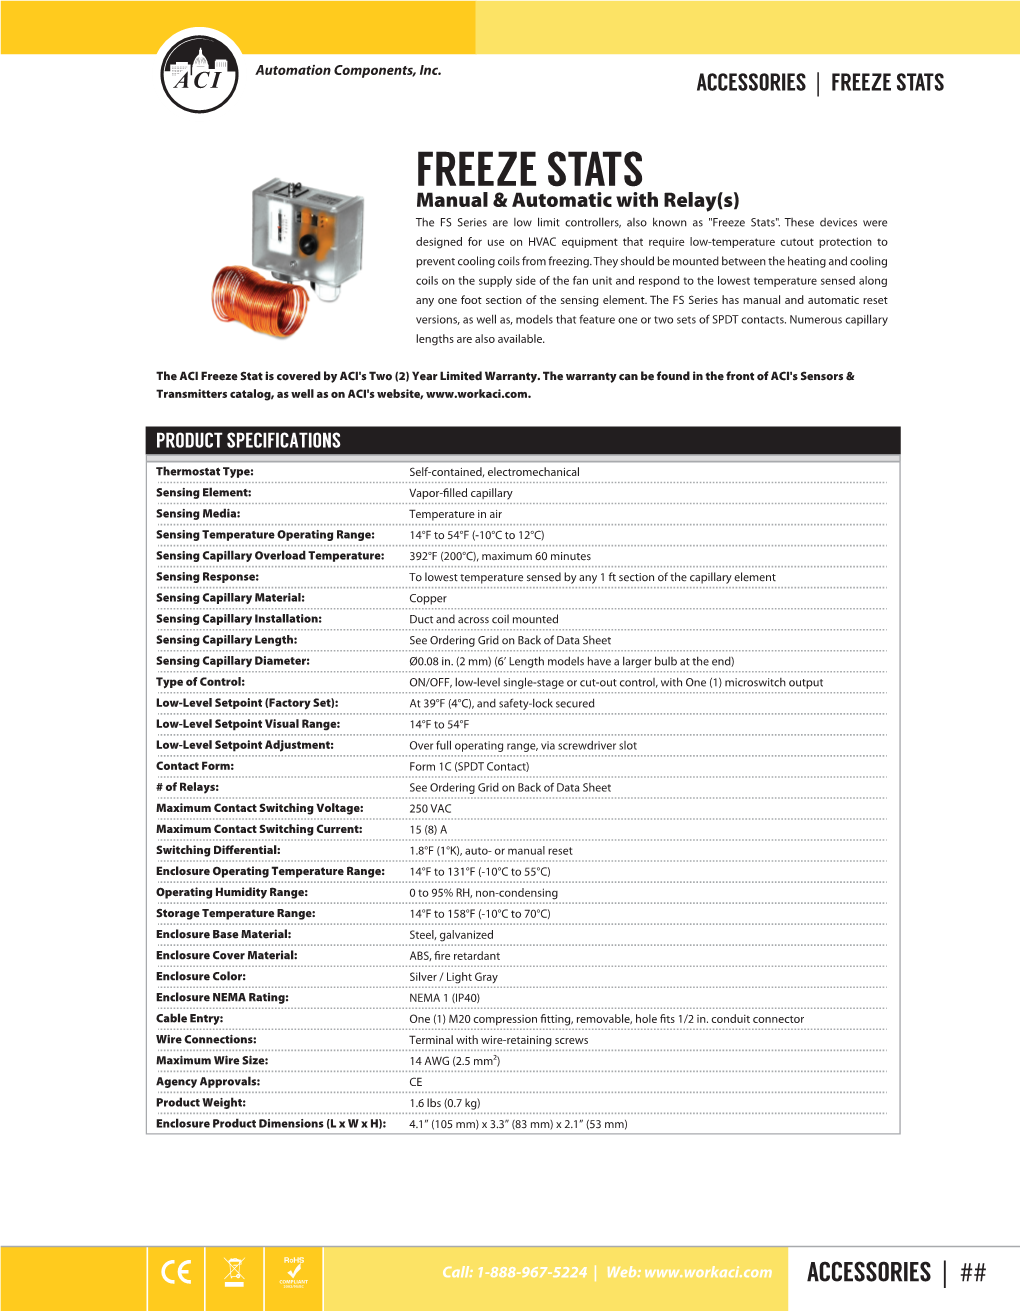 FREEZE STATS FREEZE STATS Manual & Automatic with Relay(S) the FS Series Are Low Limit Controllers, Also Known As "Freeze Stats"